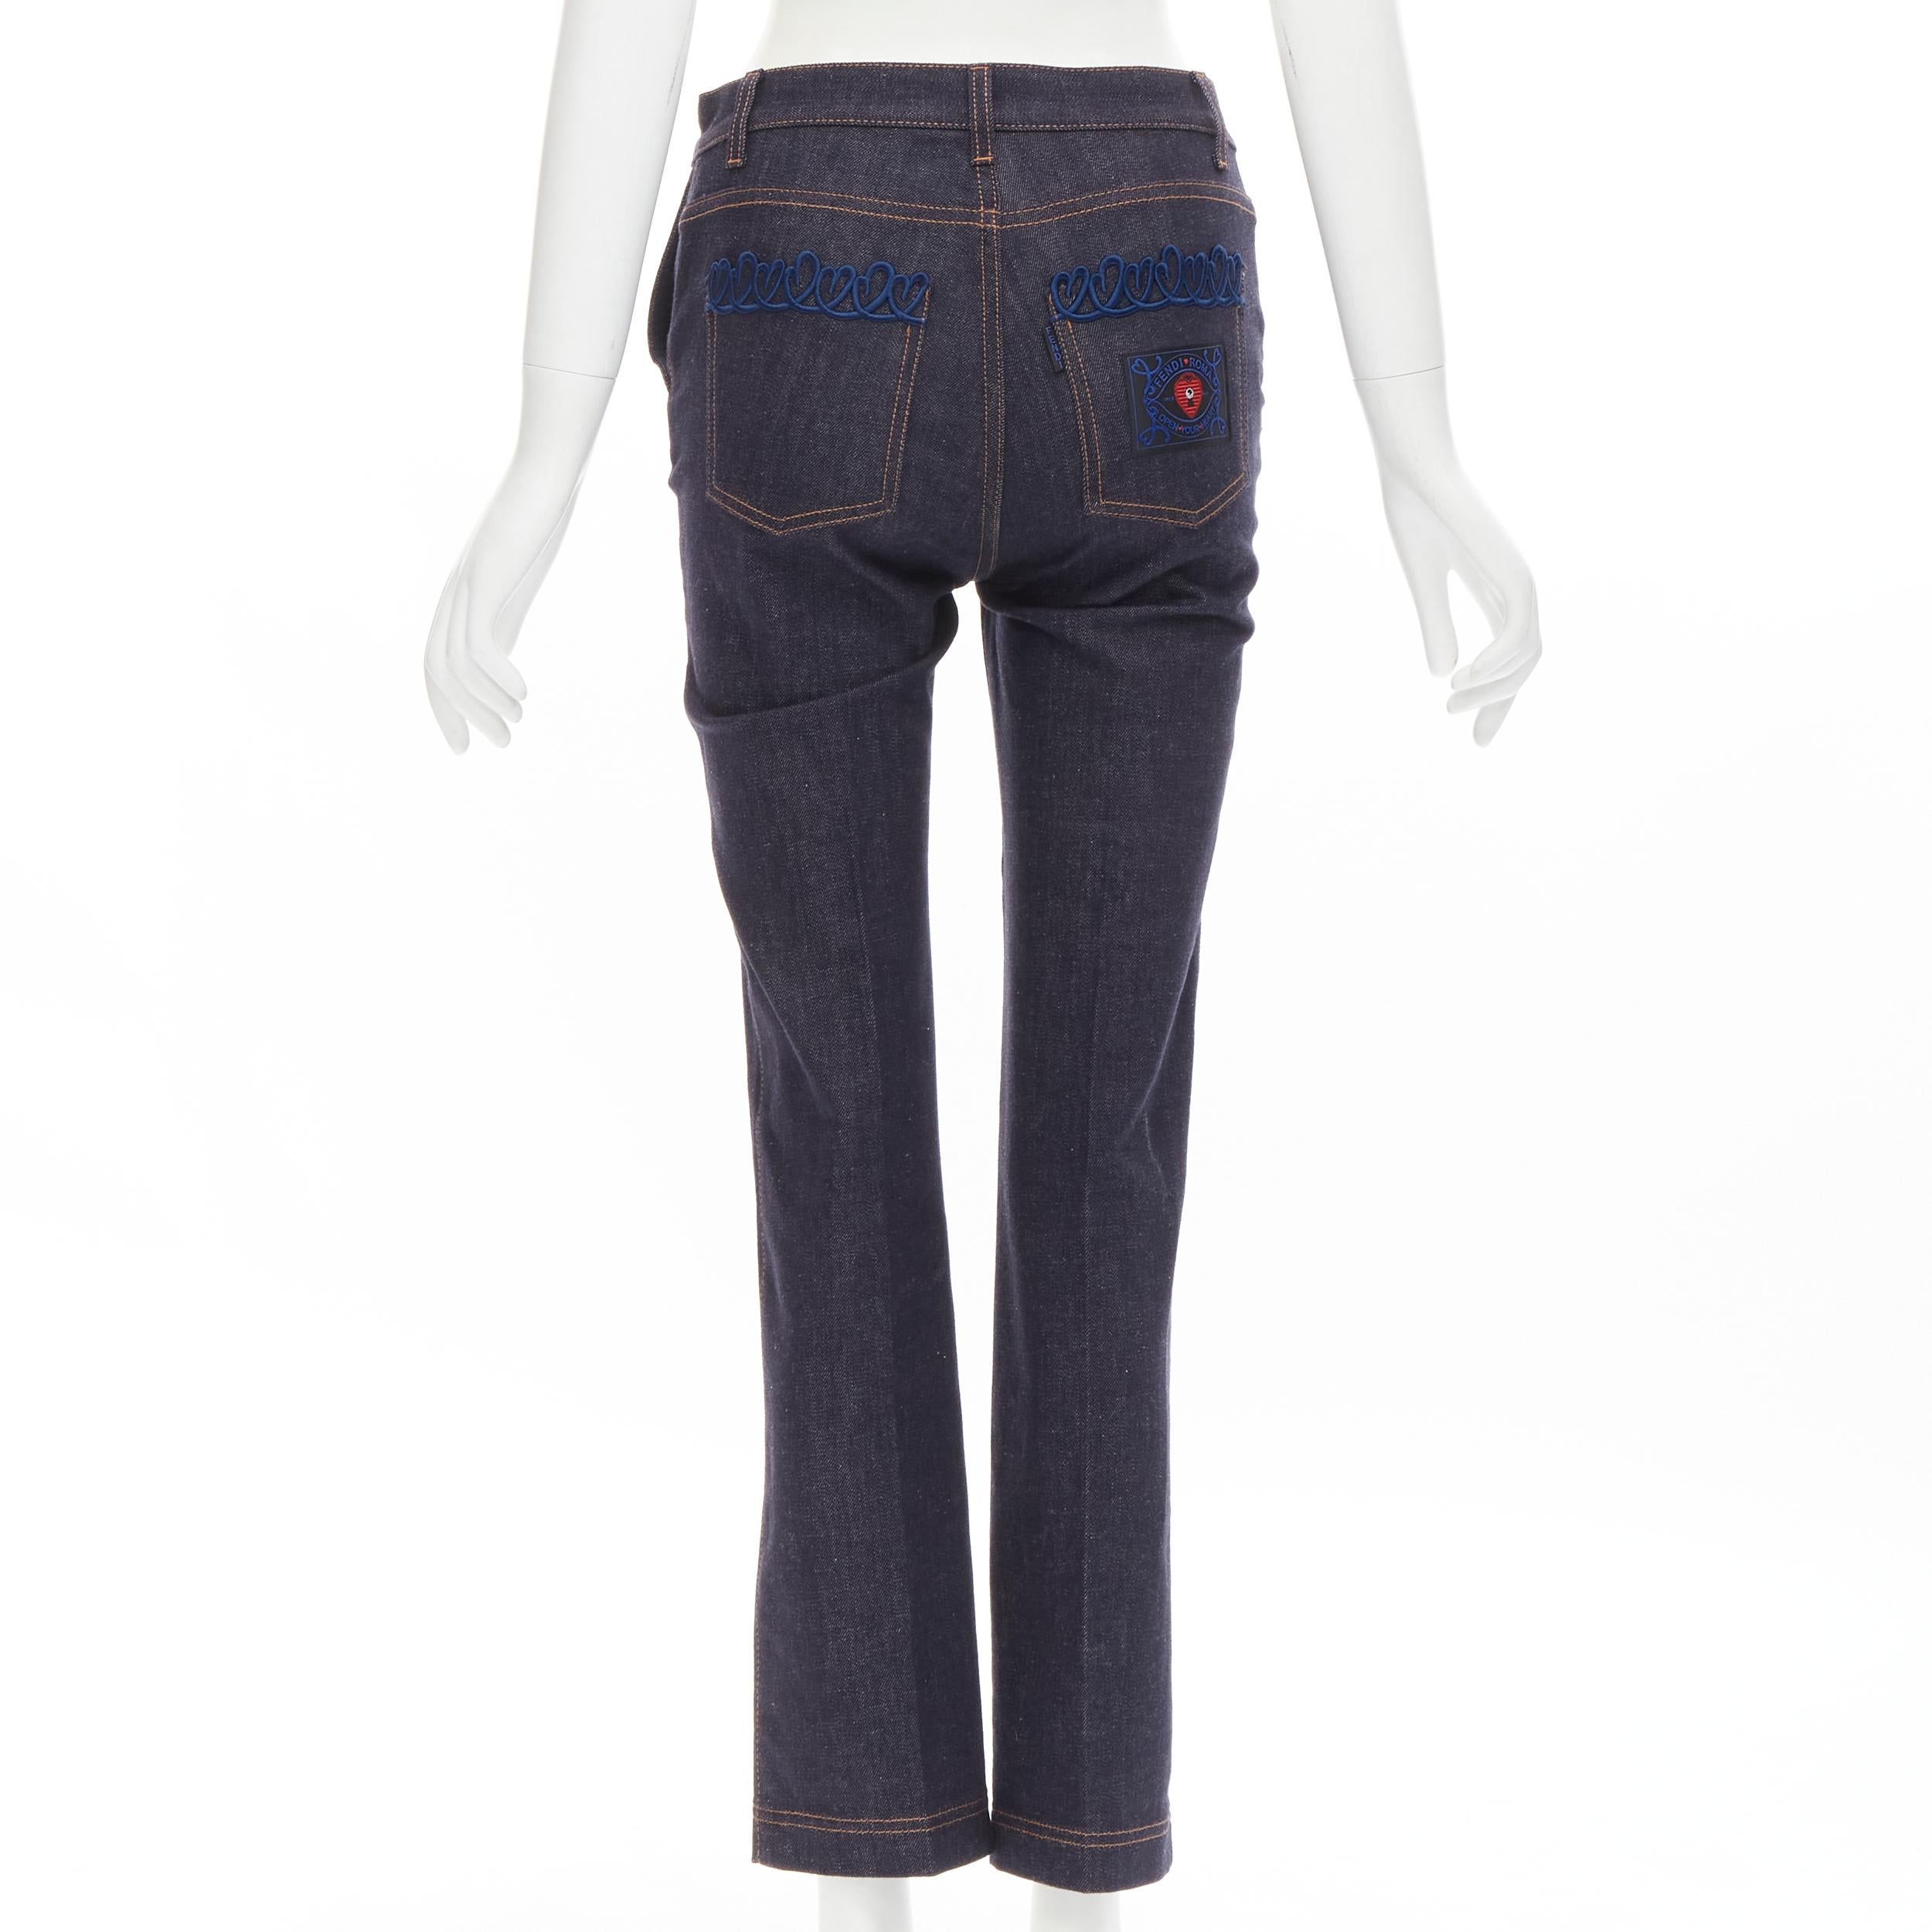 FENDI ROMA Open Your Heart scribble embroidery indigo blue jeans
Brand: Fendi
Collection: Open Your Heart 
Material: Feels like cotton
Color: Blue
Pattern: Solid
Closure: Zip
Extra Detail: Silver F button. 4-pocket. Embroidery on back